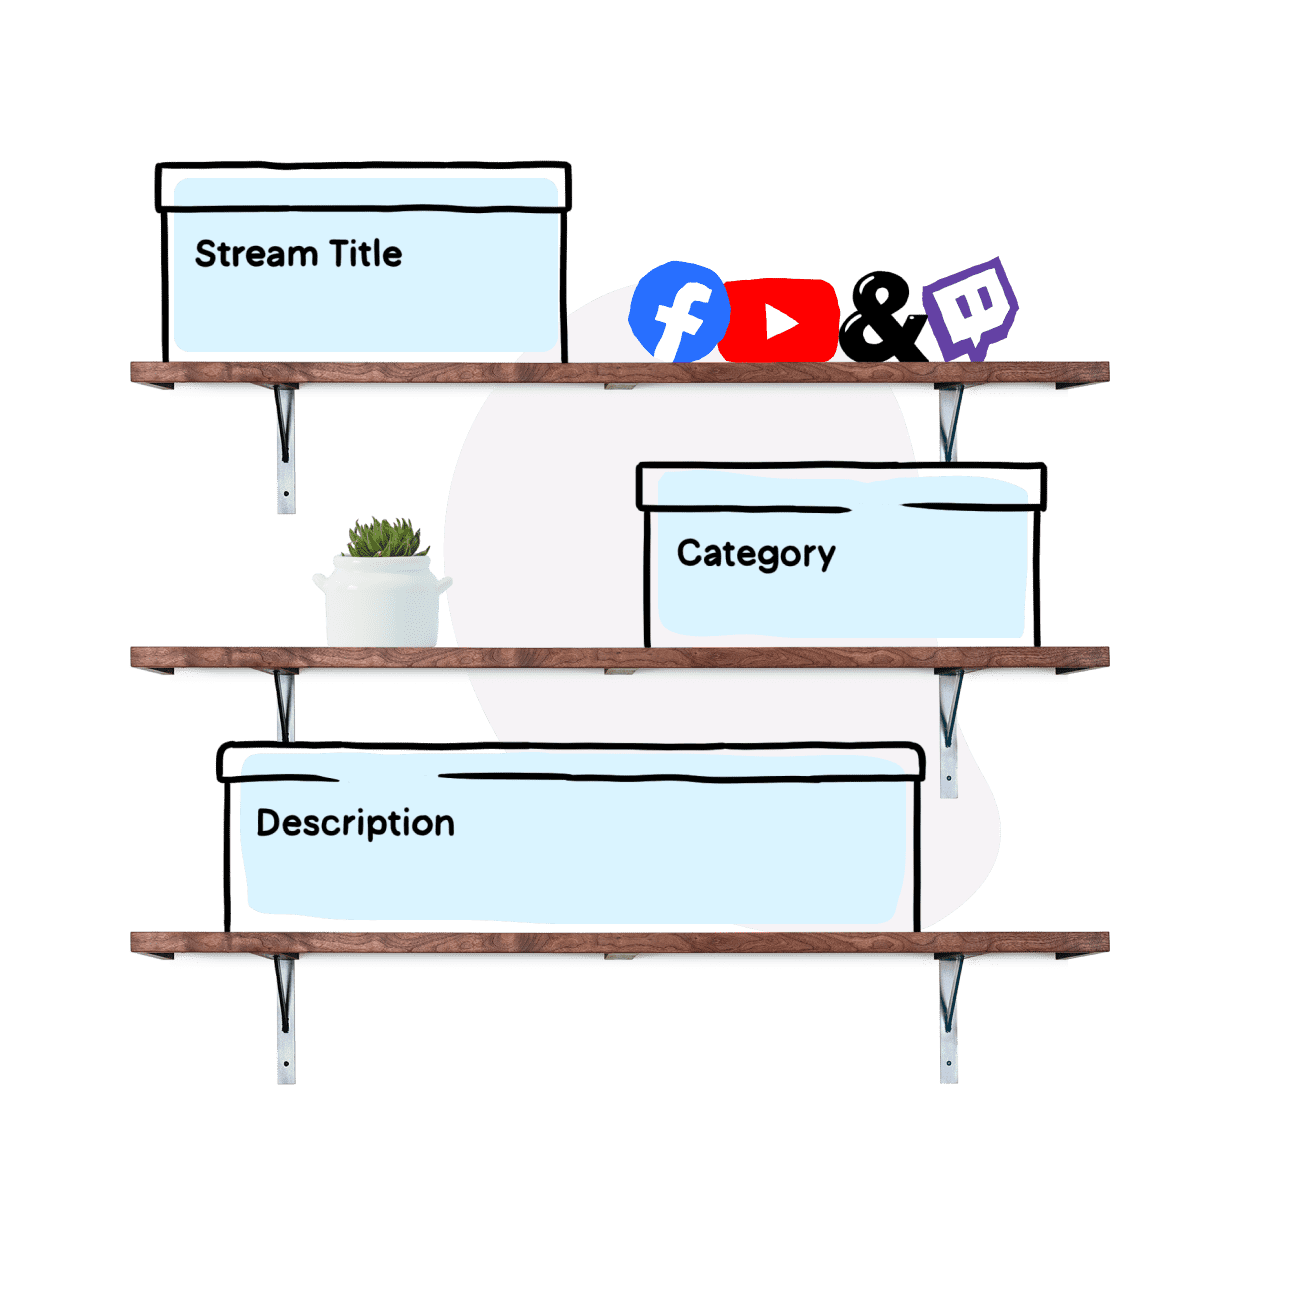 Your streaming meta data easy to set up